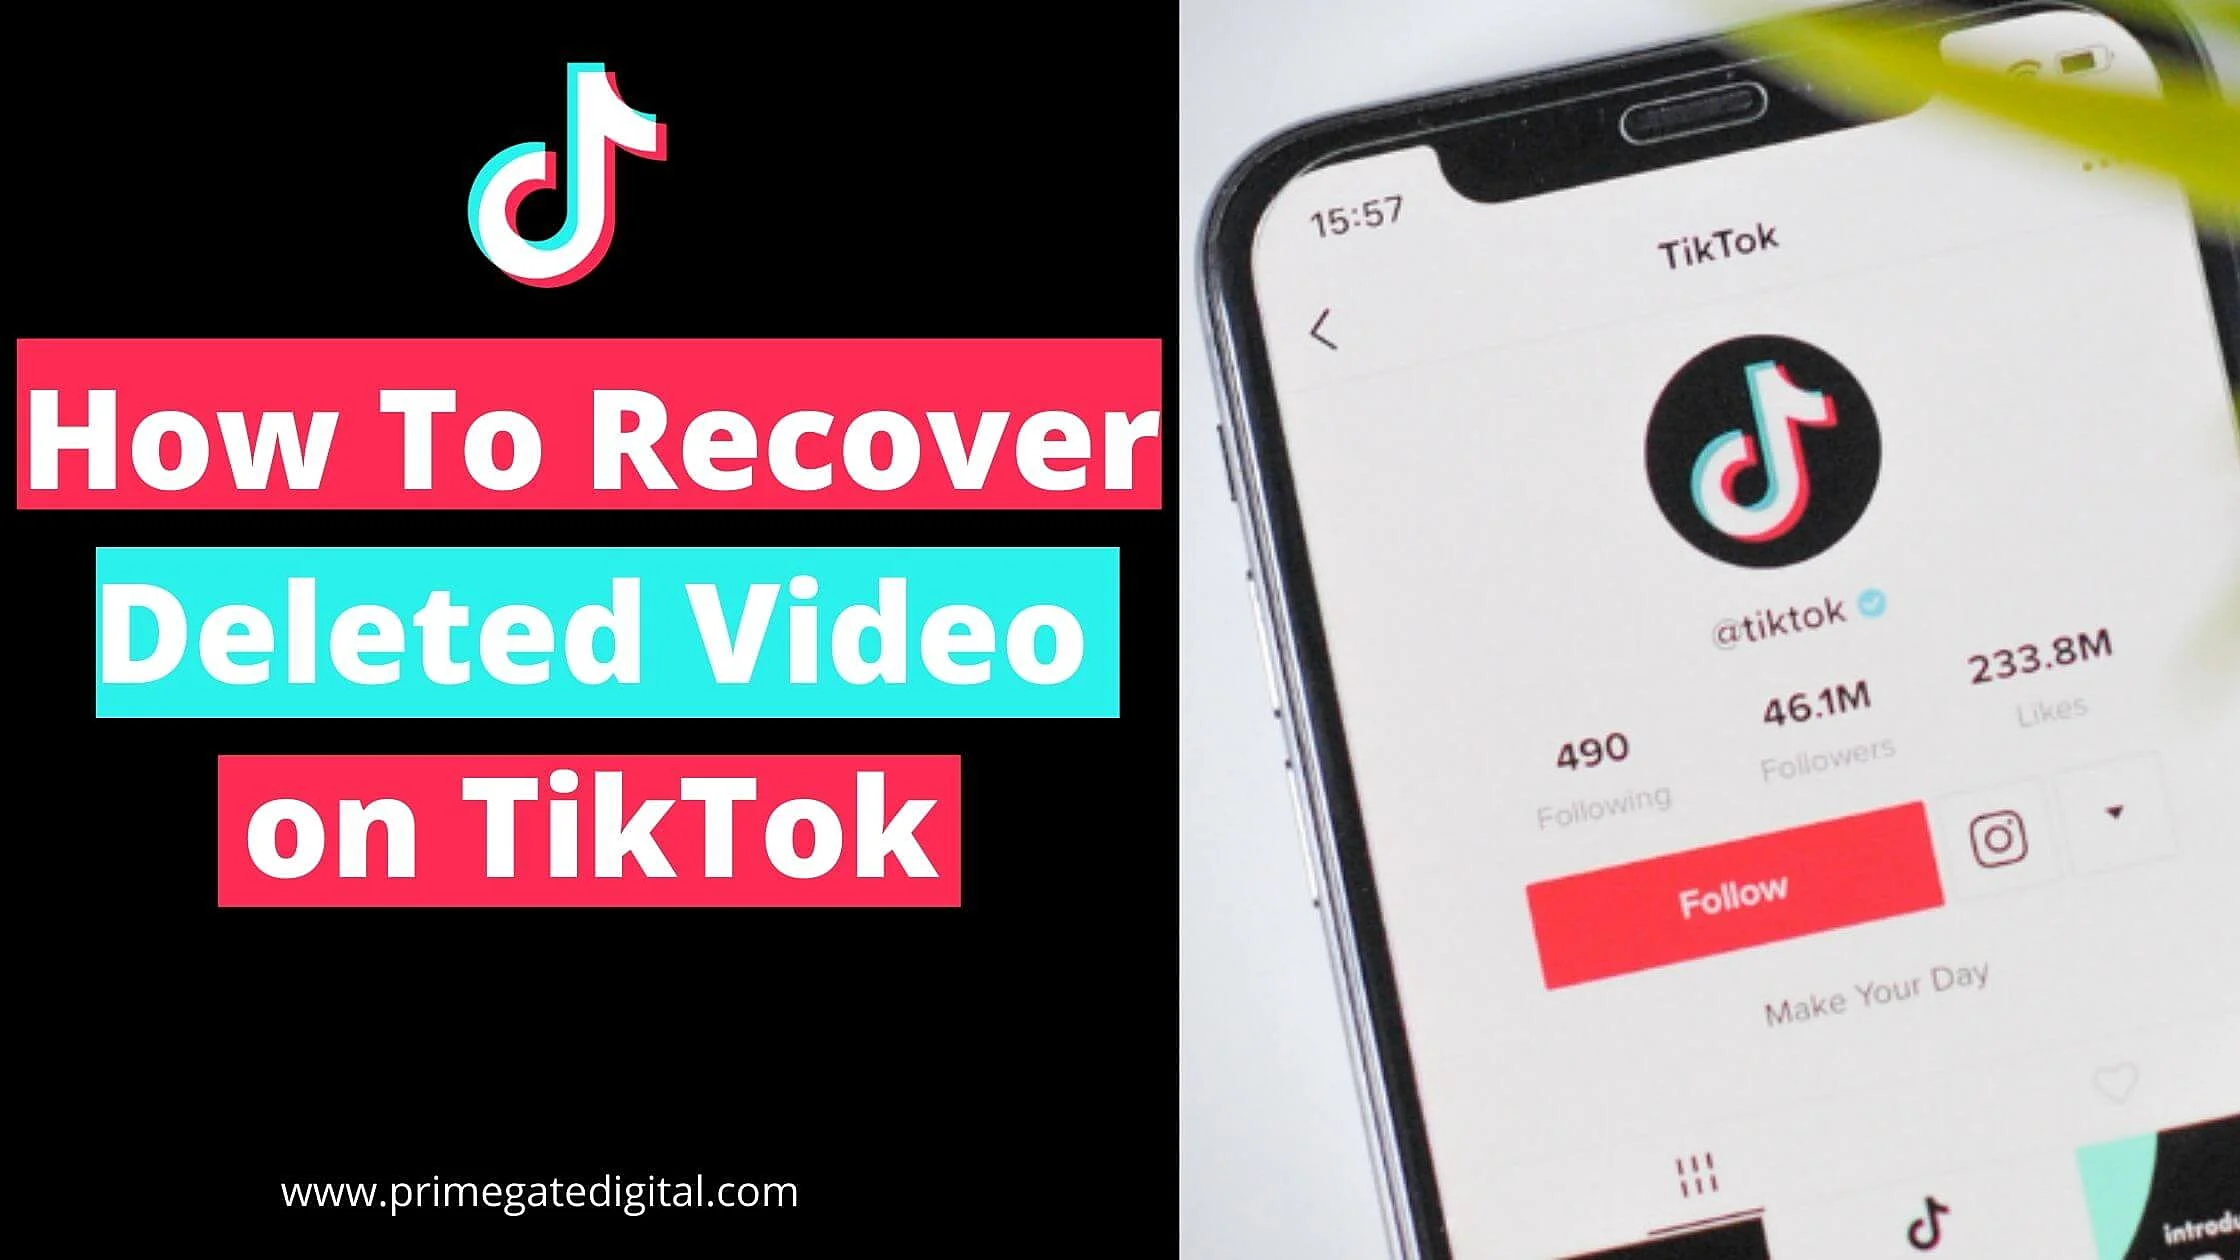 How To Recover Deleted Video on TikTok